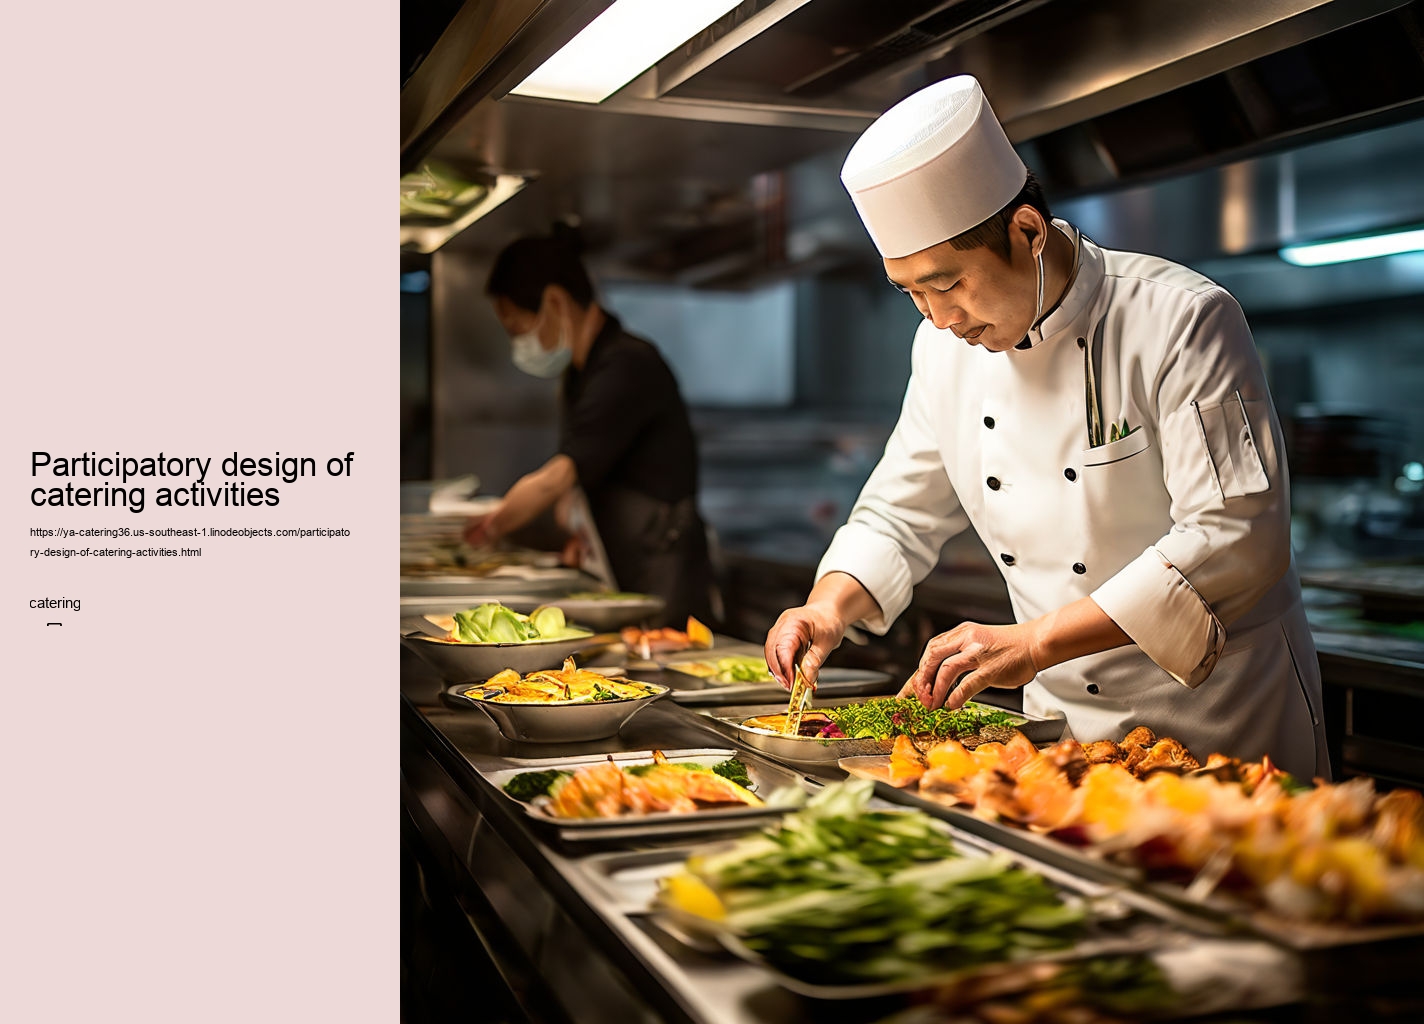 Participatory design of catering activities